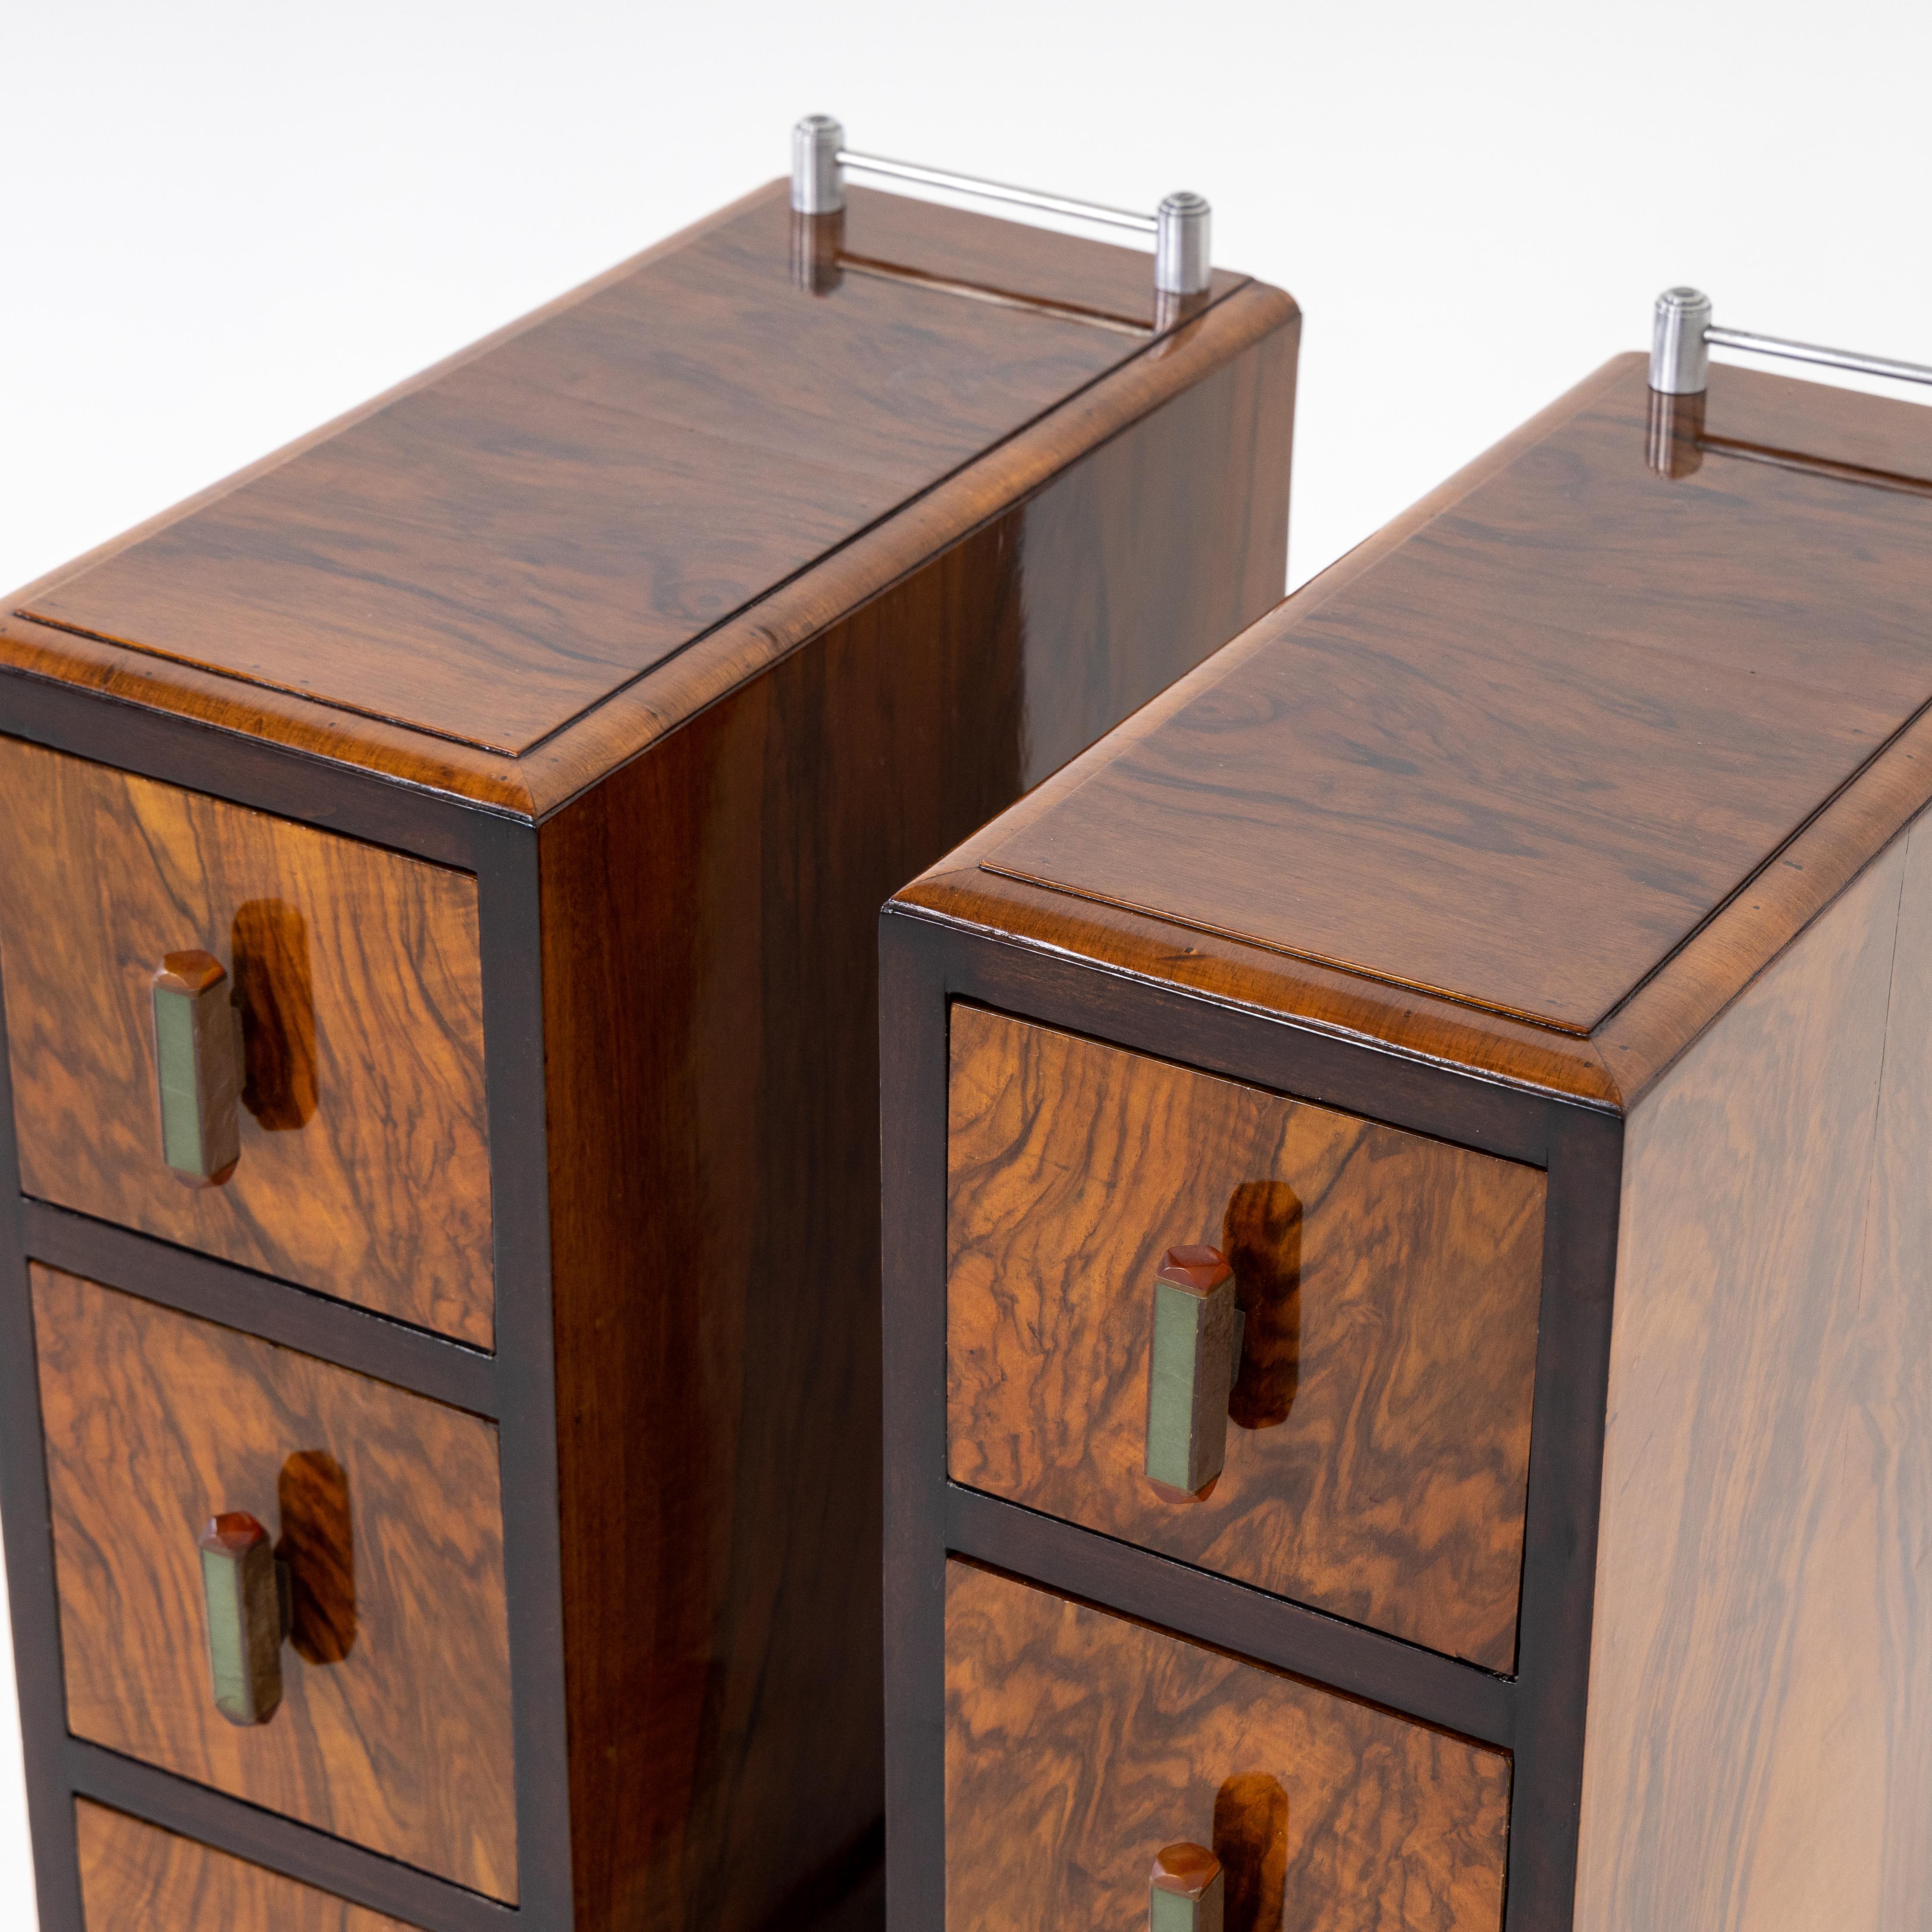 Pair of narrow nightstands with three drawers and a short chromed gallery each, veneered in walnut.